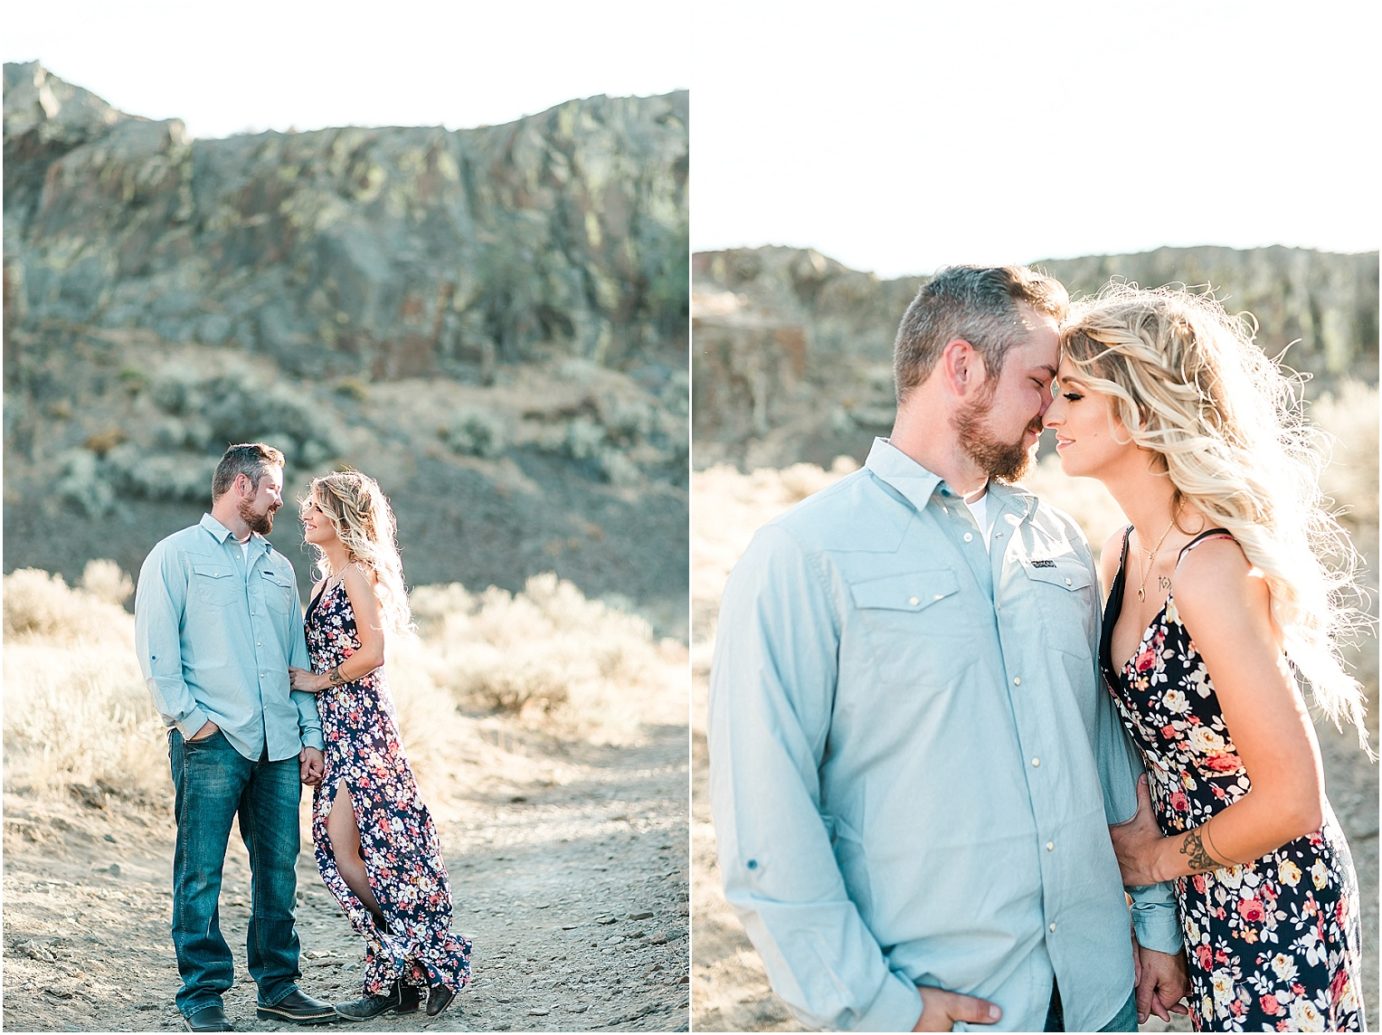 Frenchman Coulee Engagement Session Vantage WA Michael and Carley smiling at each other